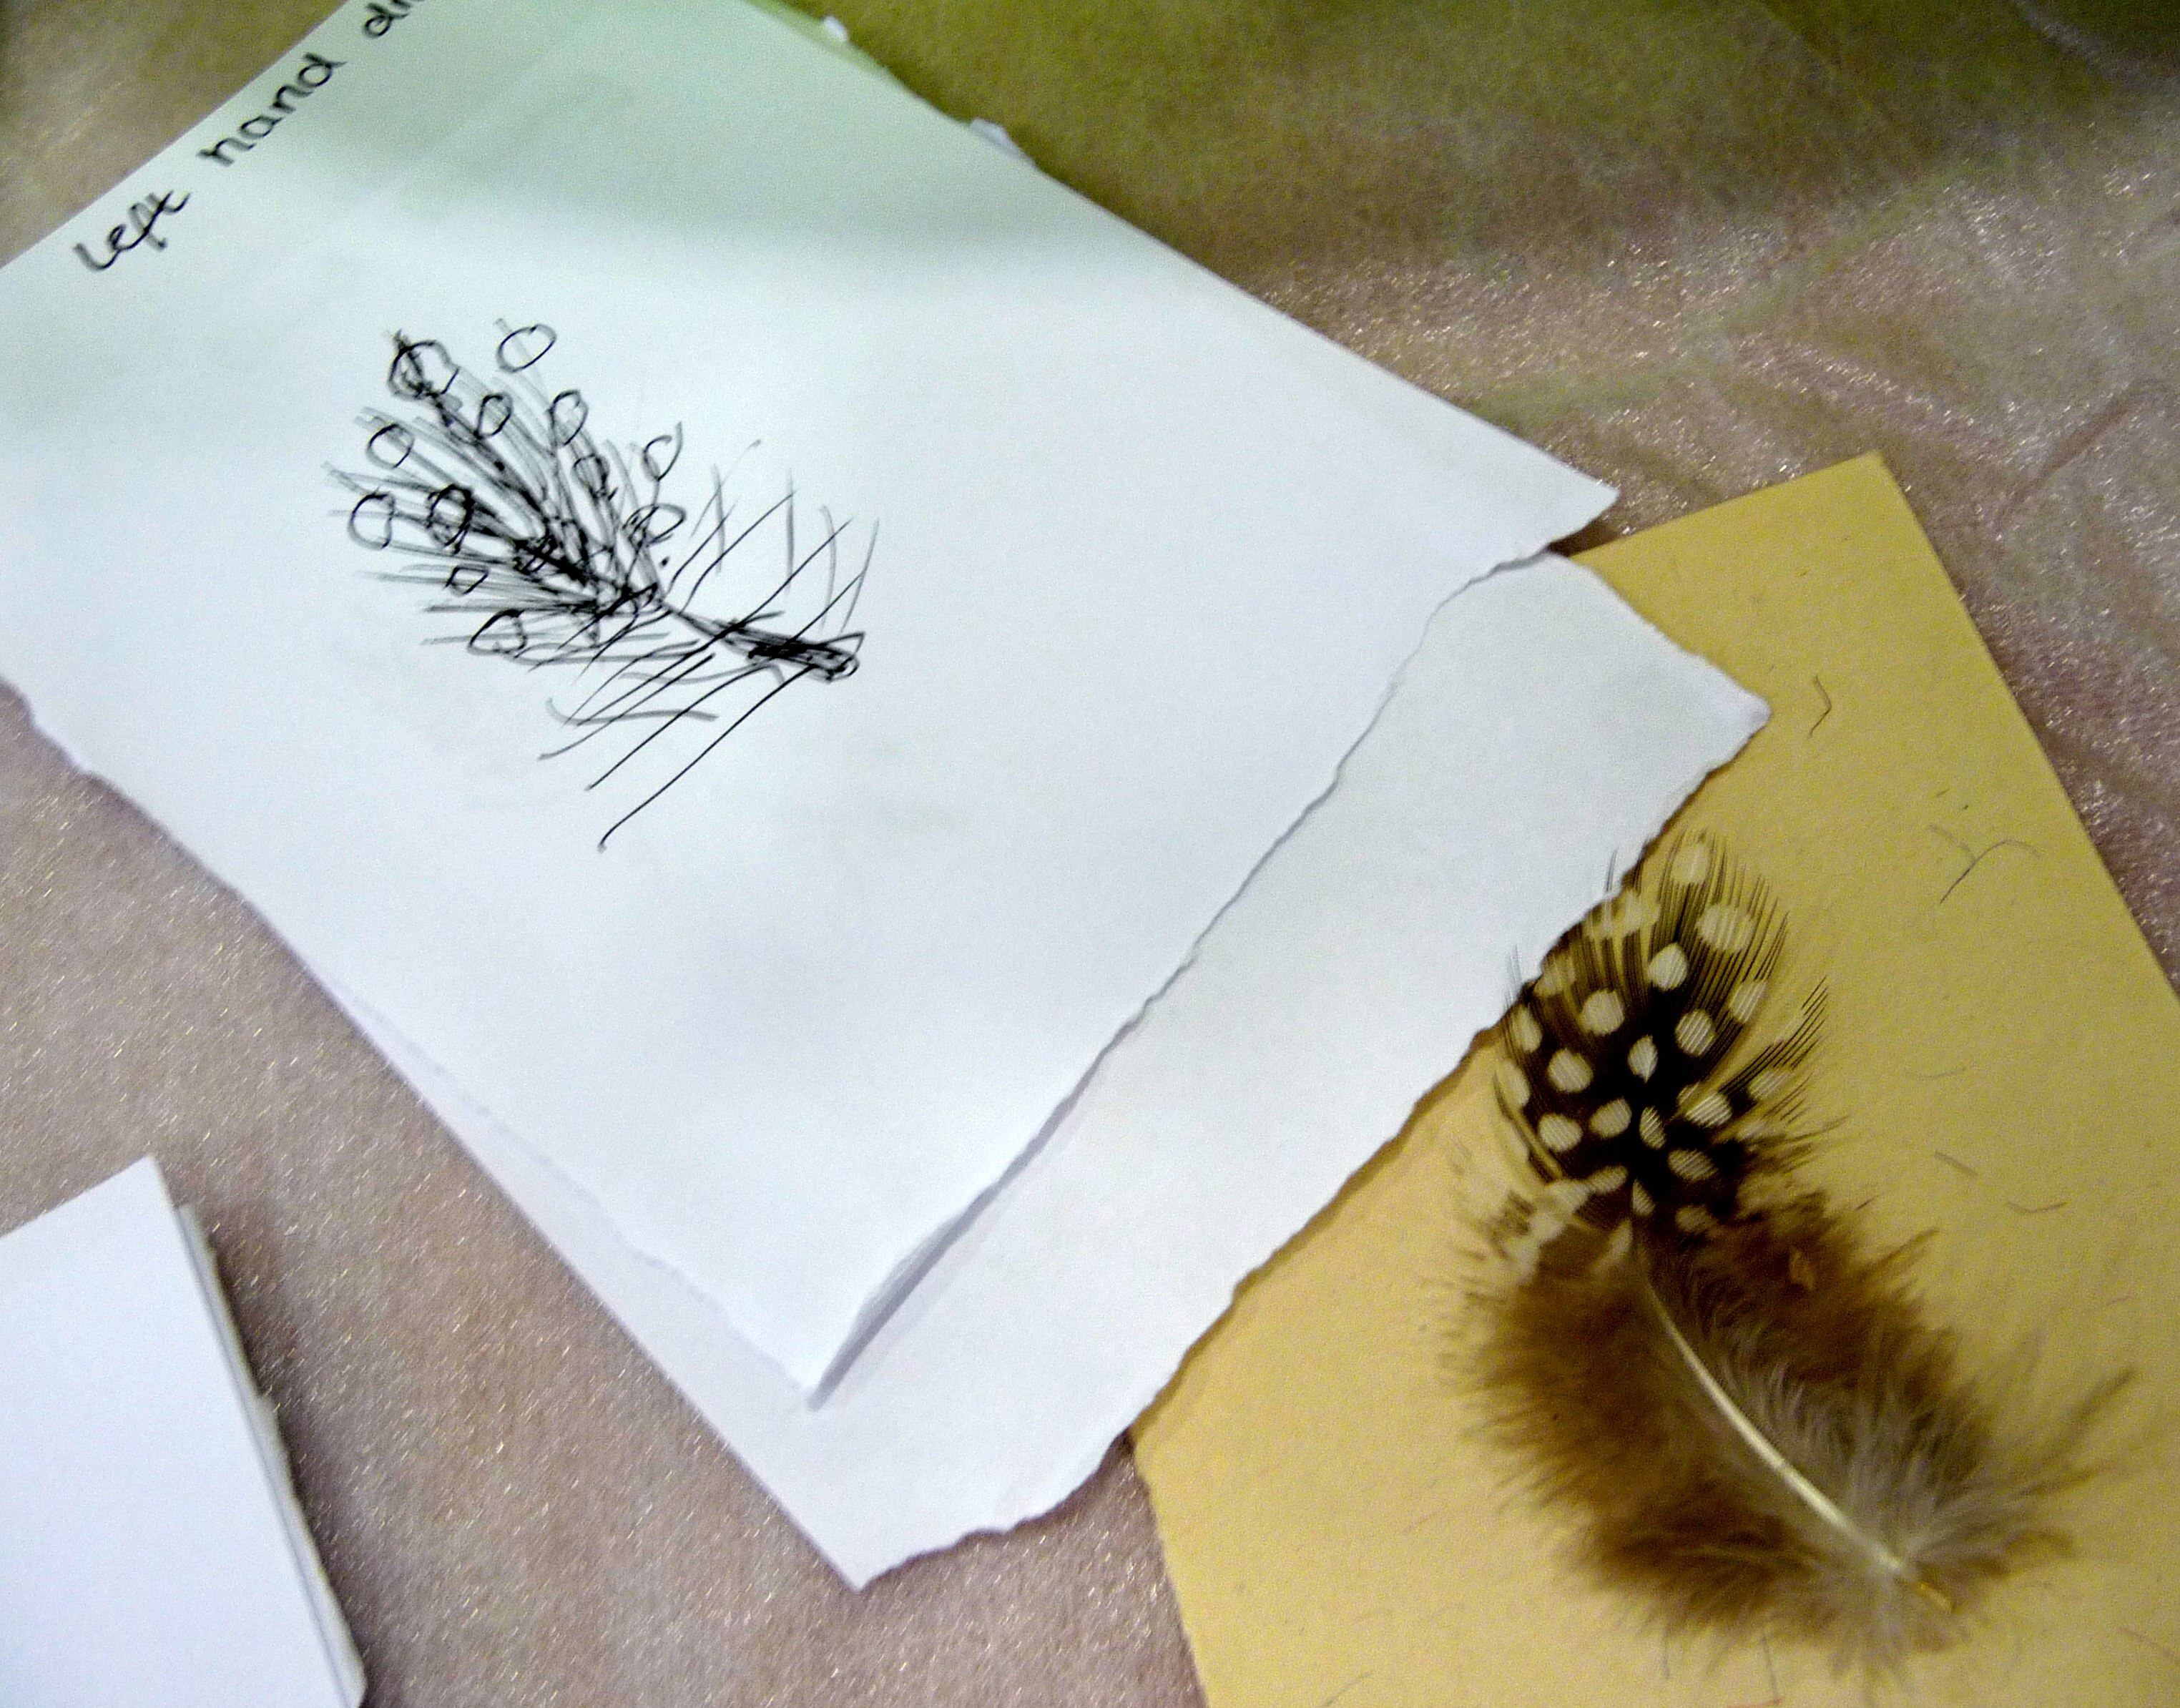 we had to draw a feather with the 'wrong hand'